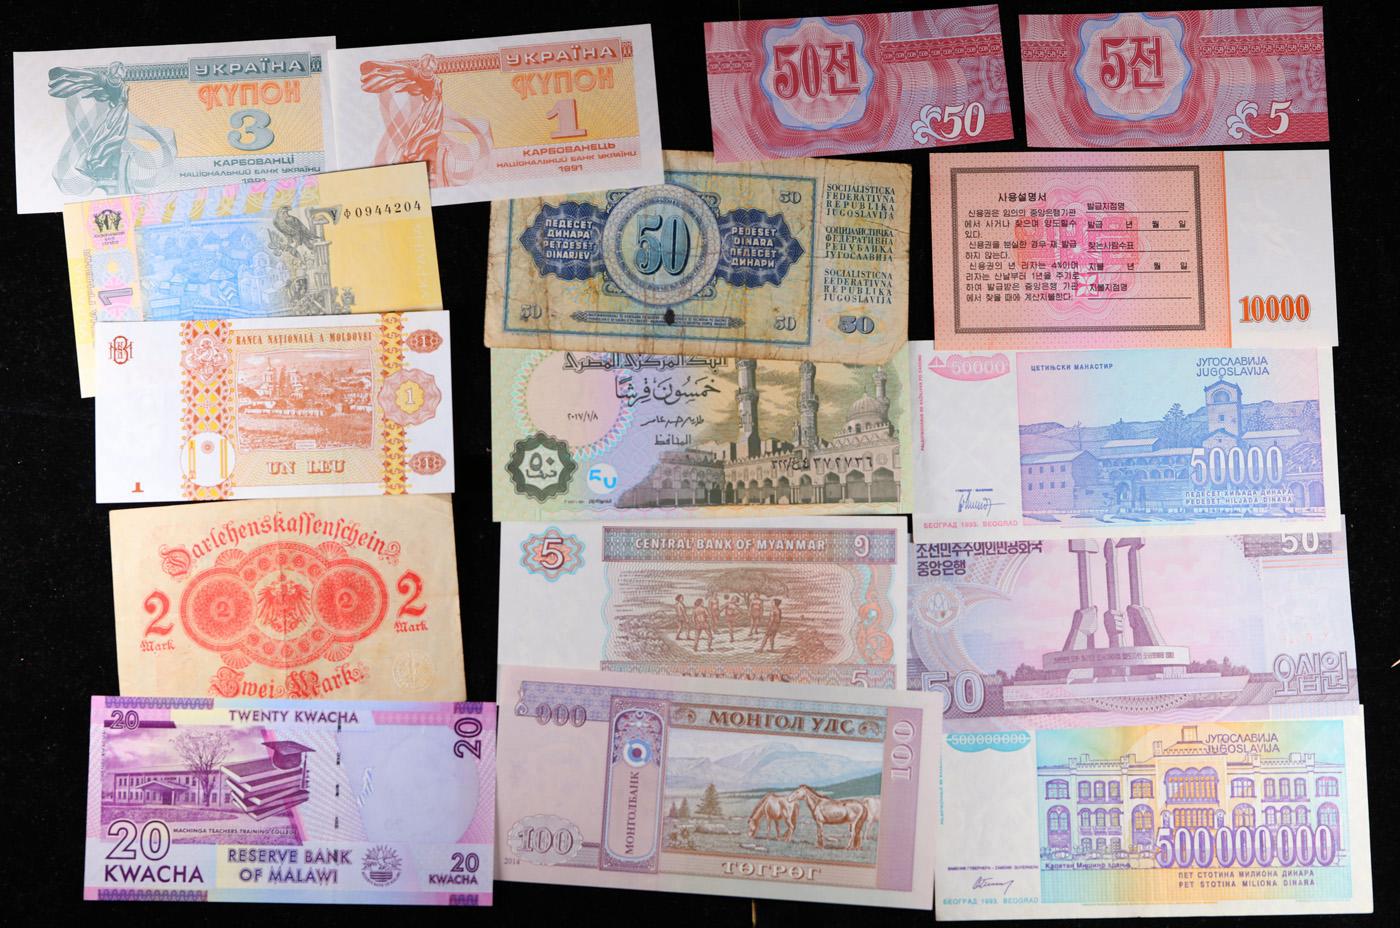 Lot of 27 Foreign Currency Notes - Variety of Countries, Years, Denominations!